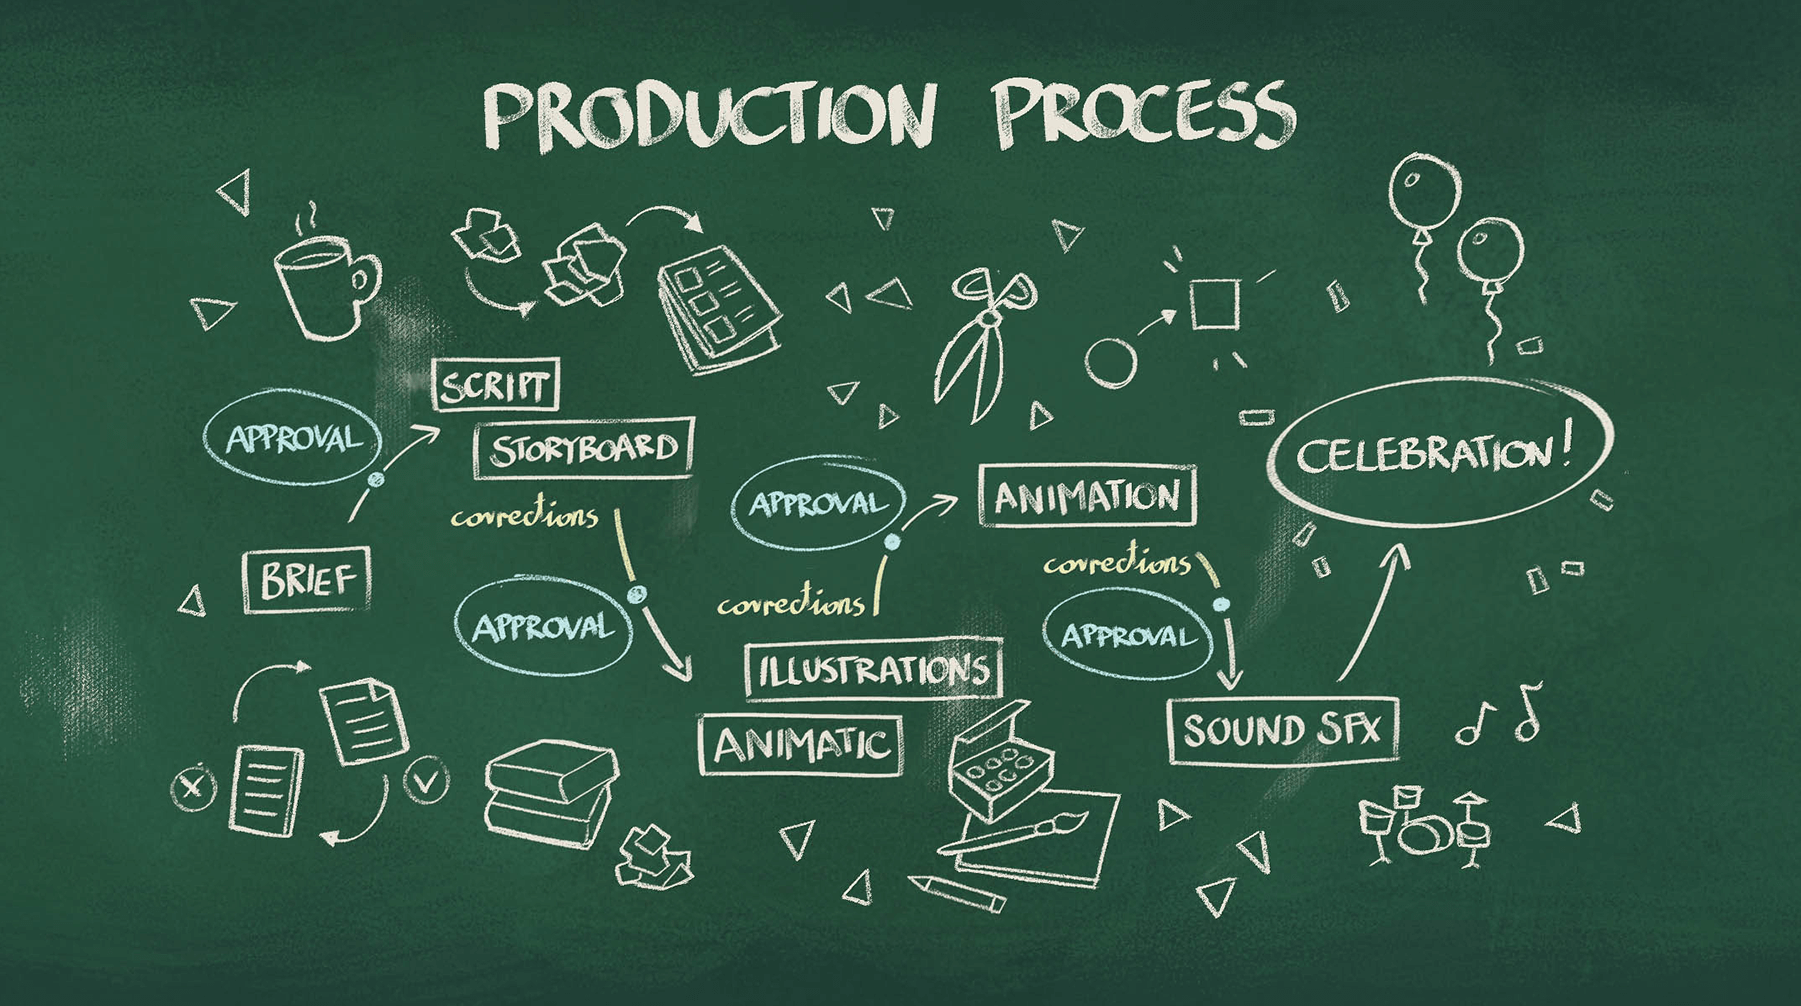 How Long Does It Take To Produce an Animation? - Pigeon Studio